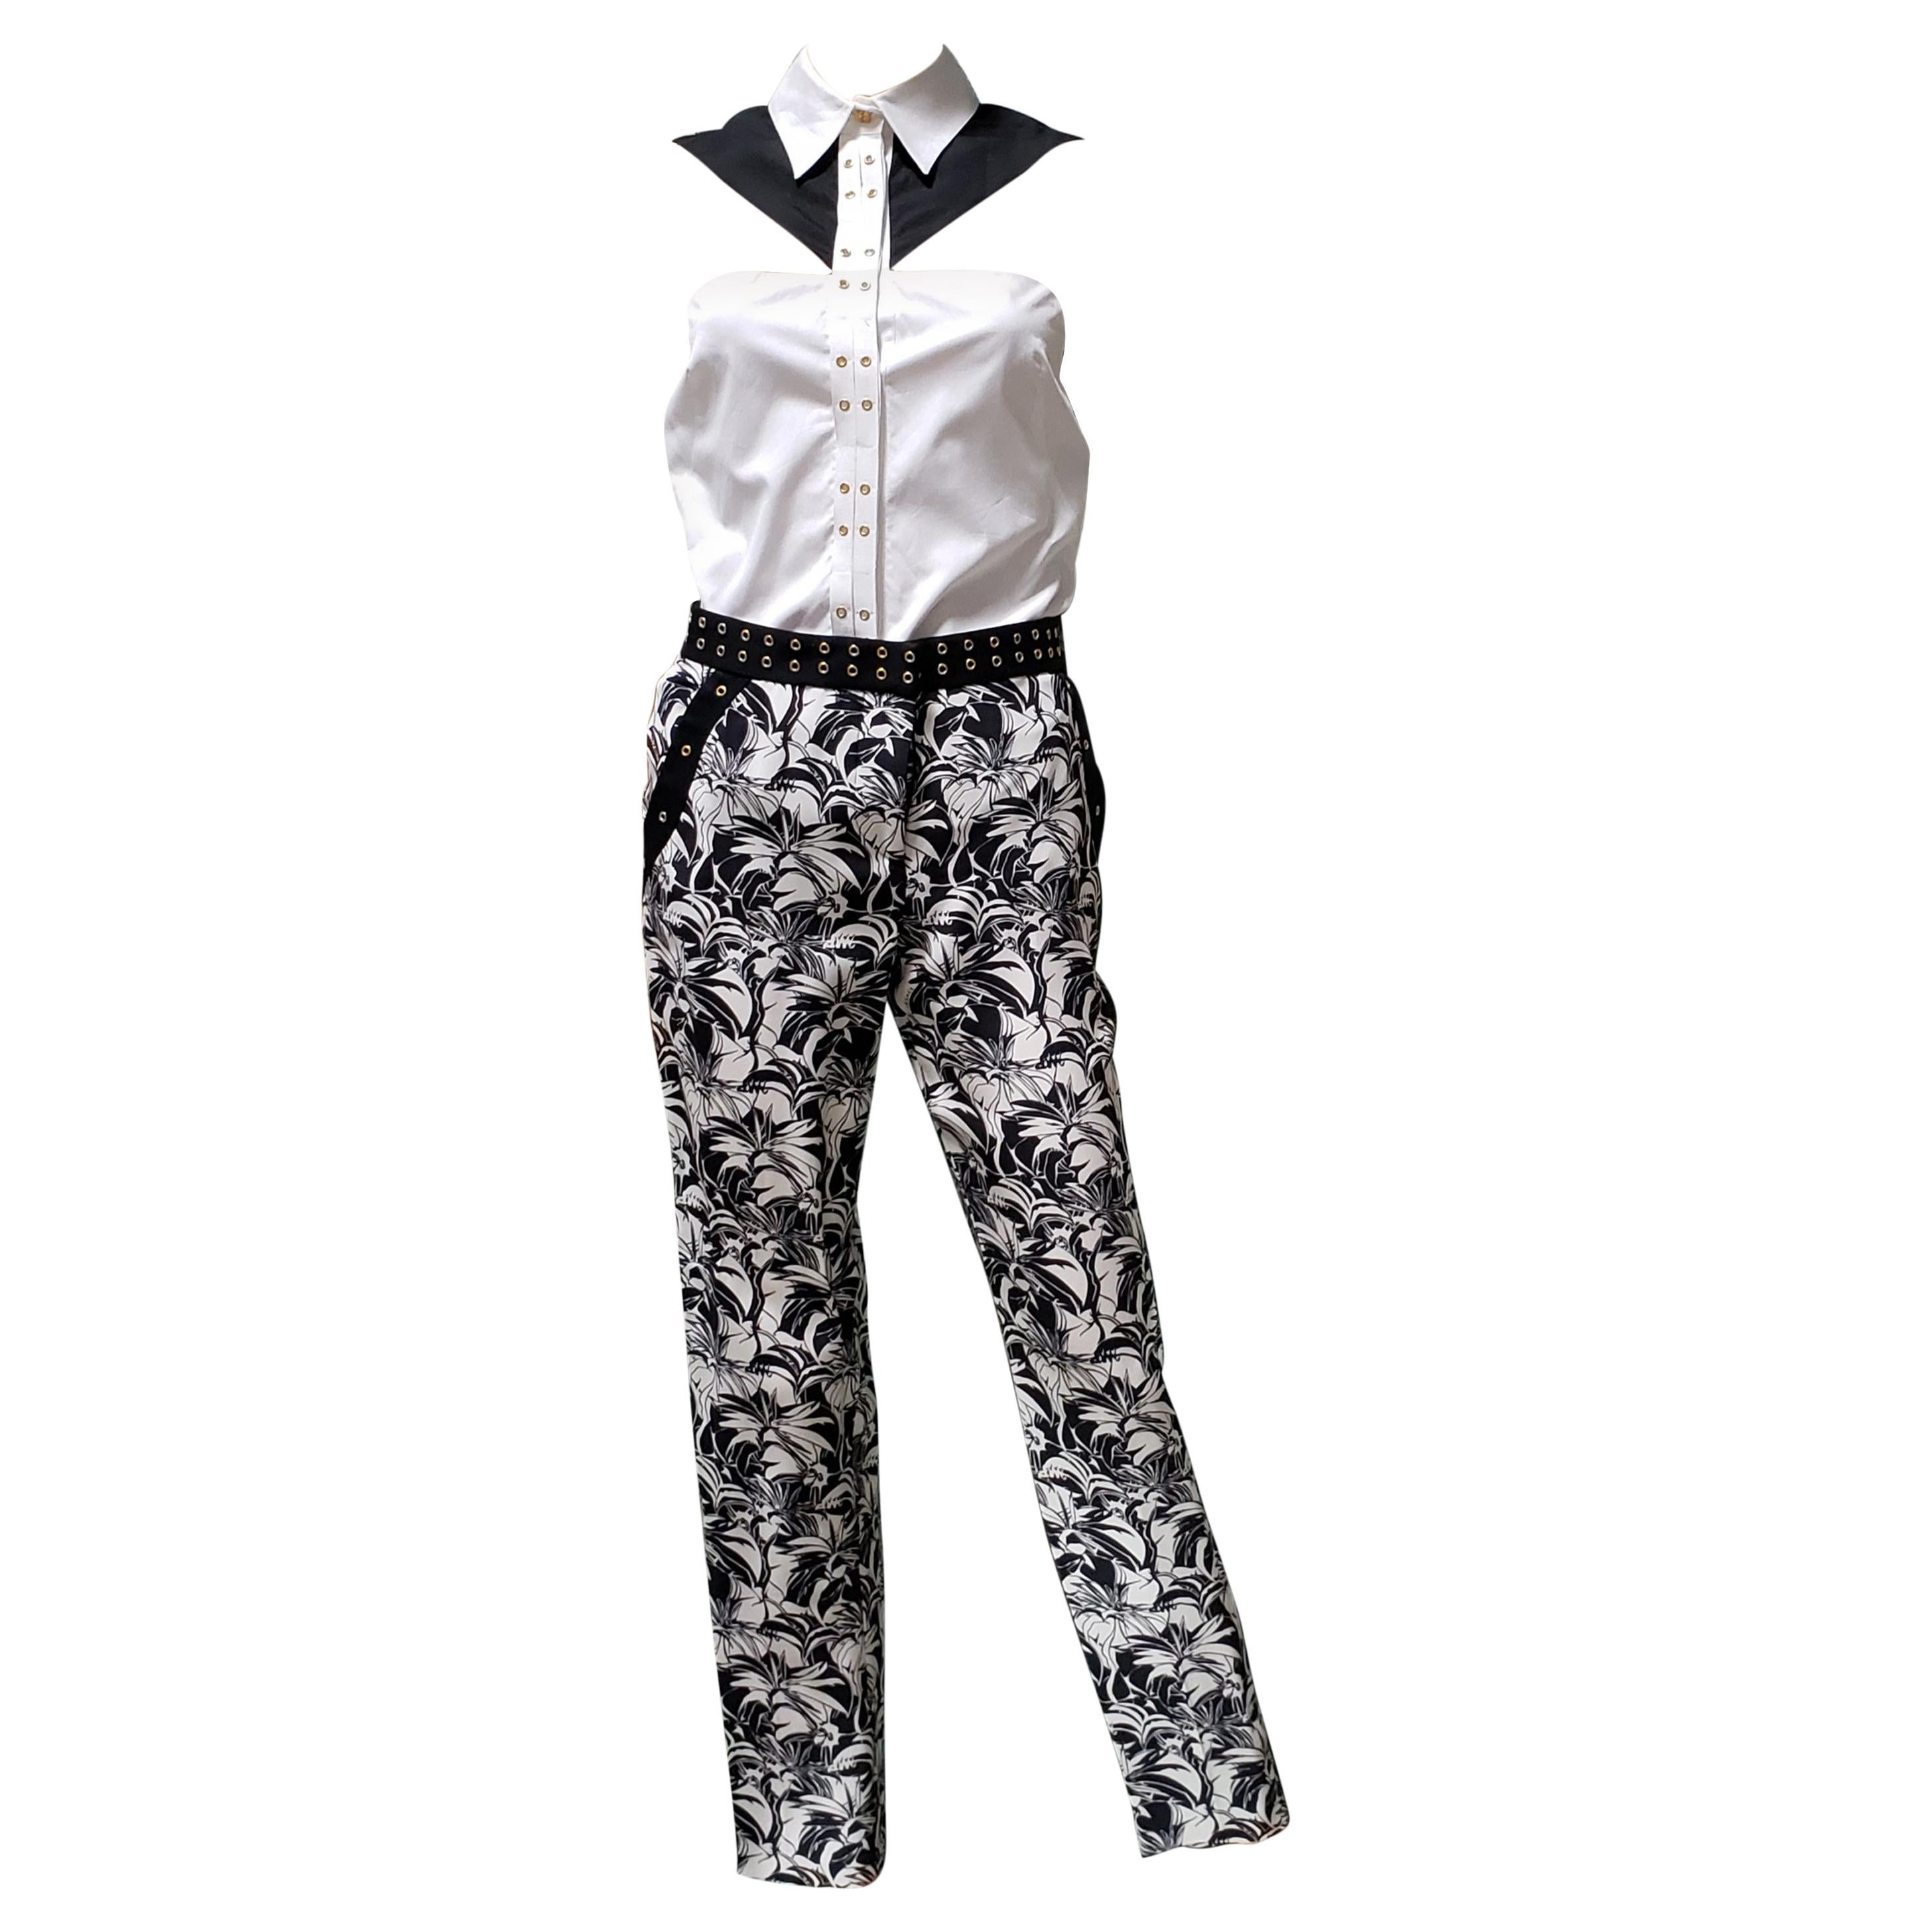 Resort 2012 L#6 NEW VERSACE FLORAL BLACK and WHITE SILK COTTON PANTS SUIT 38 - 2 For Sale